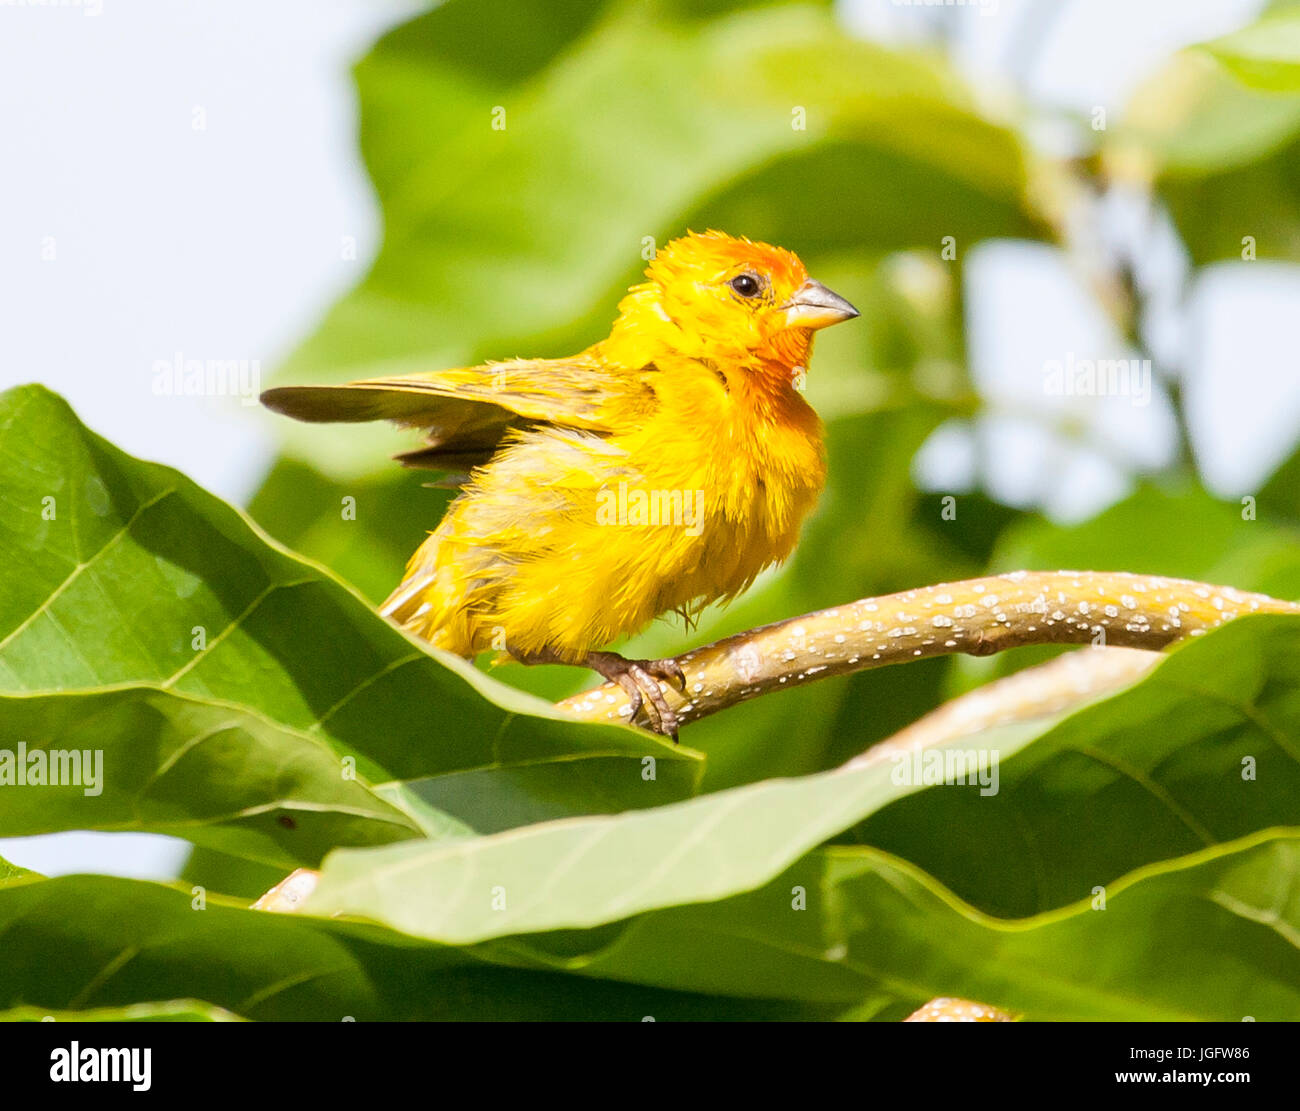 Beautiful Saffron Finch Perched on Tree Branch Stock Photo